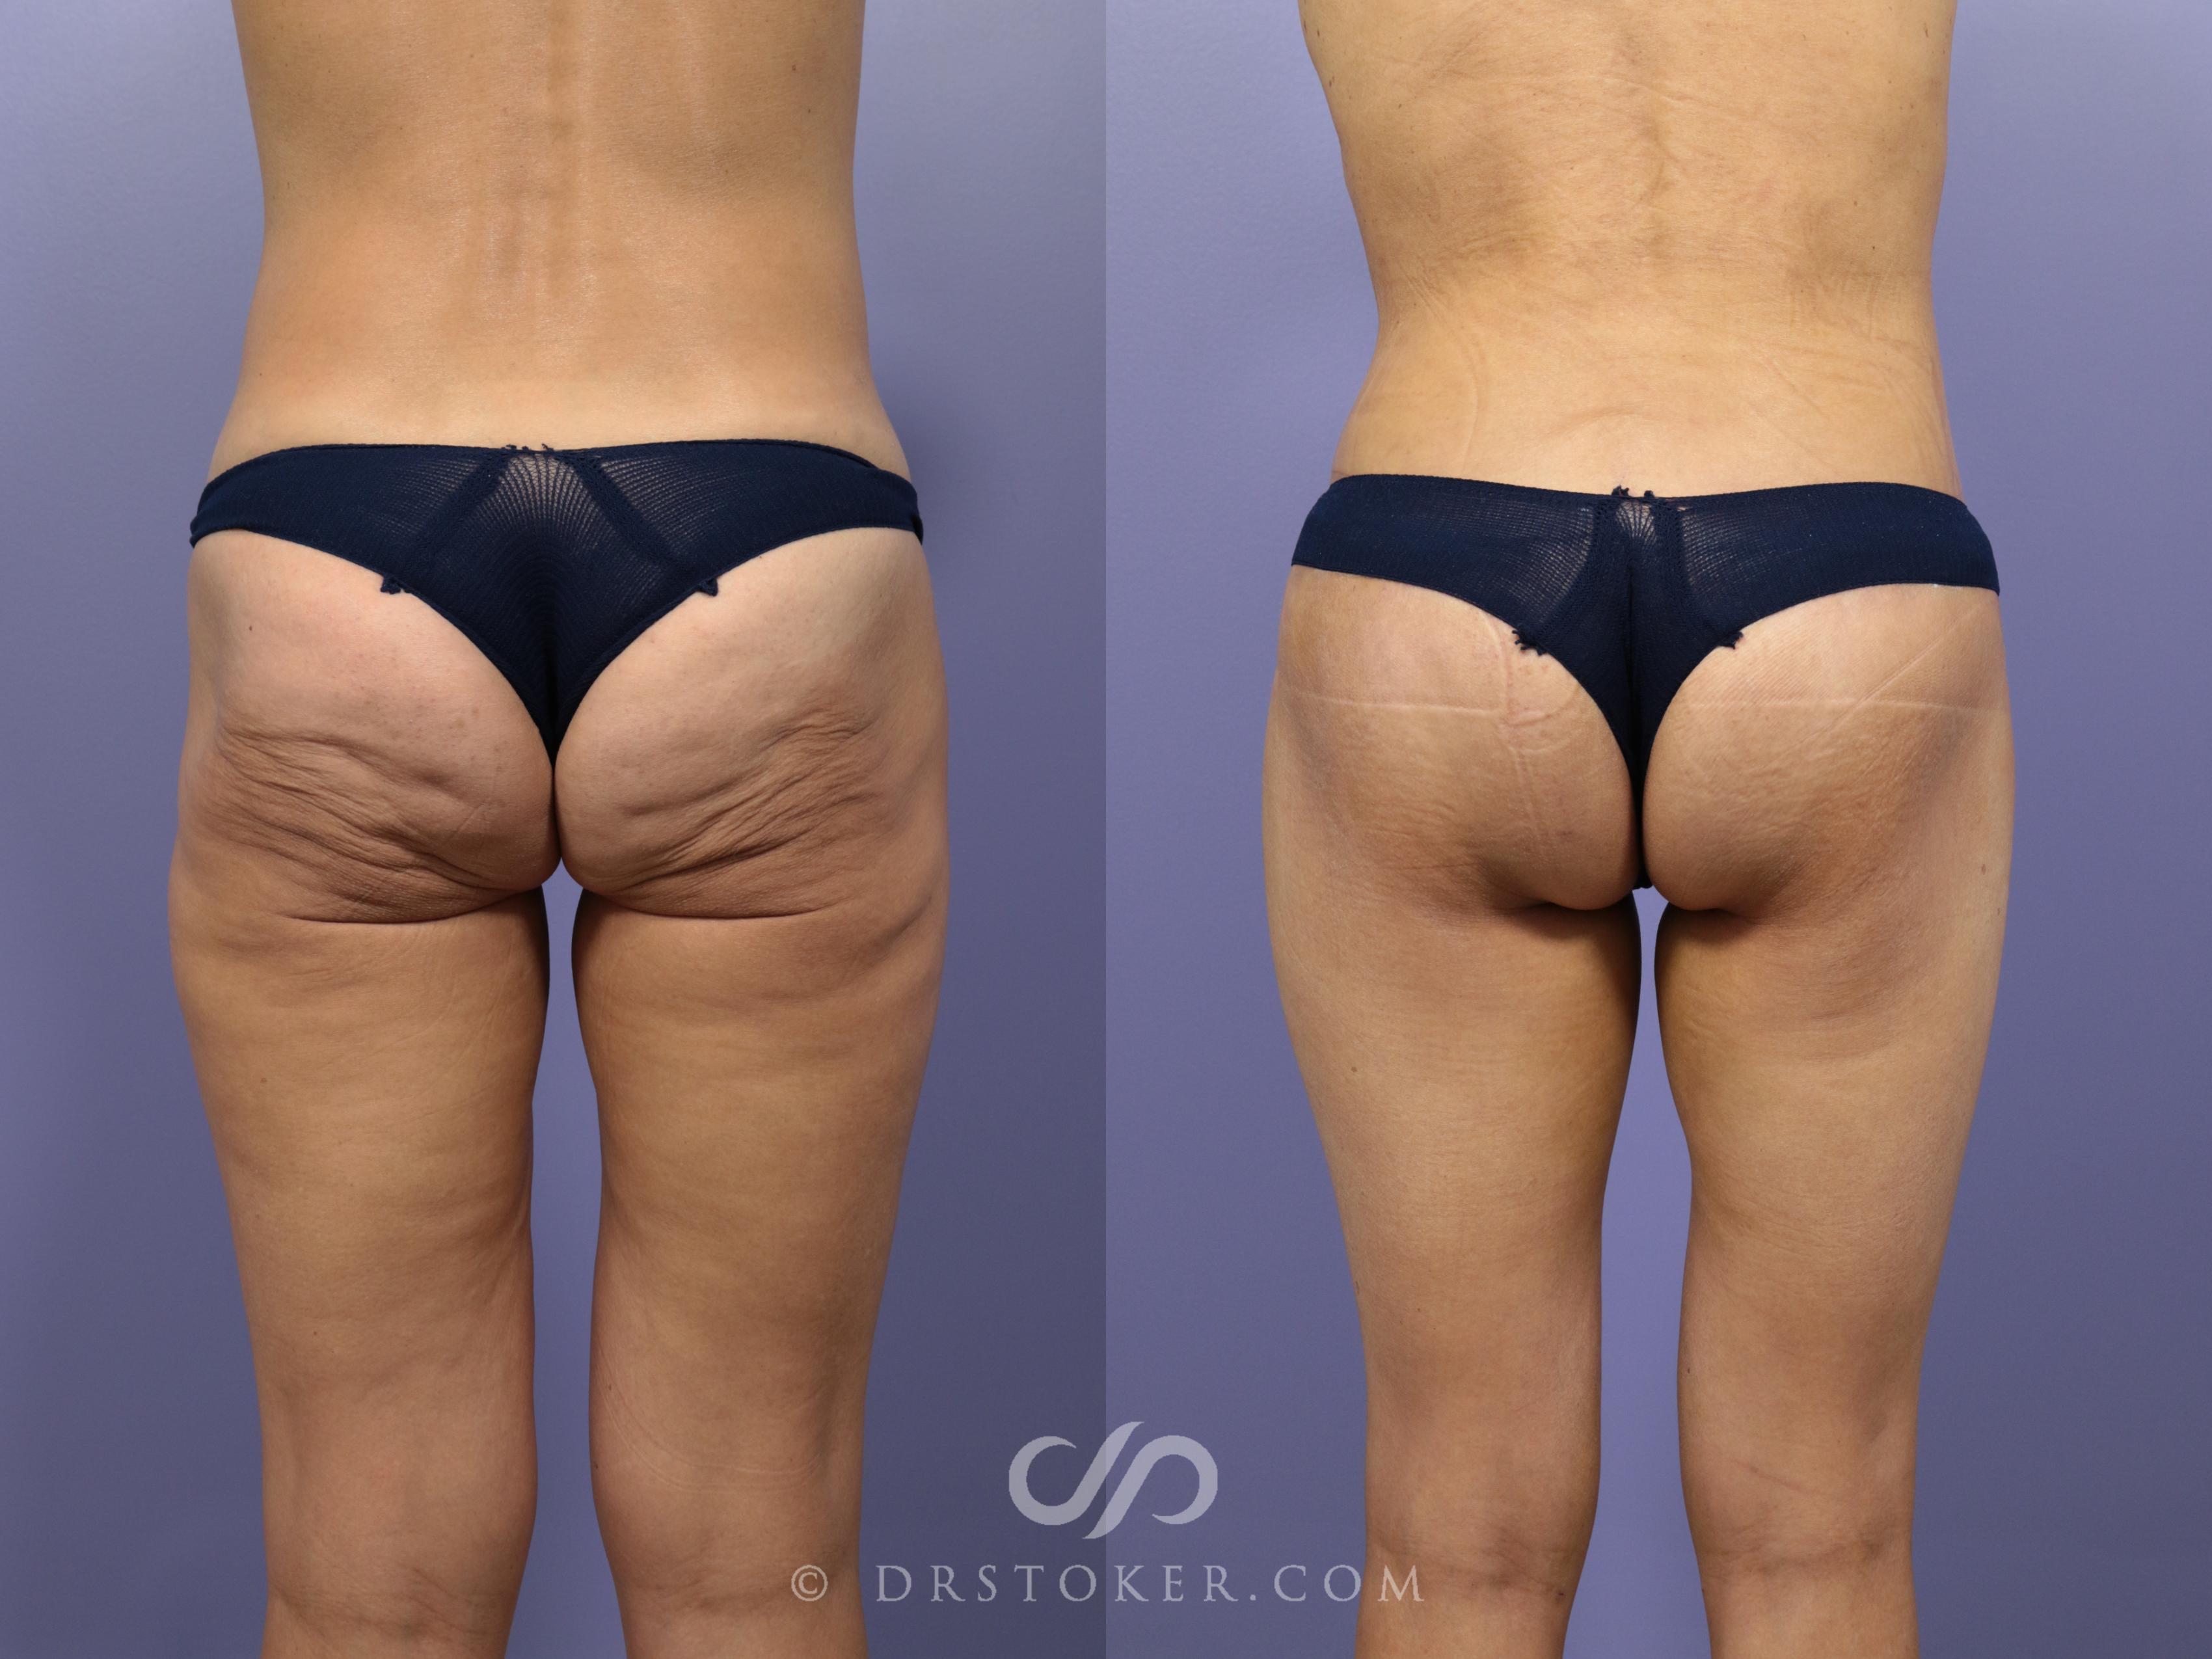 Thigh Lift Surgery Risks Beverly Hills, Los Angeles